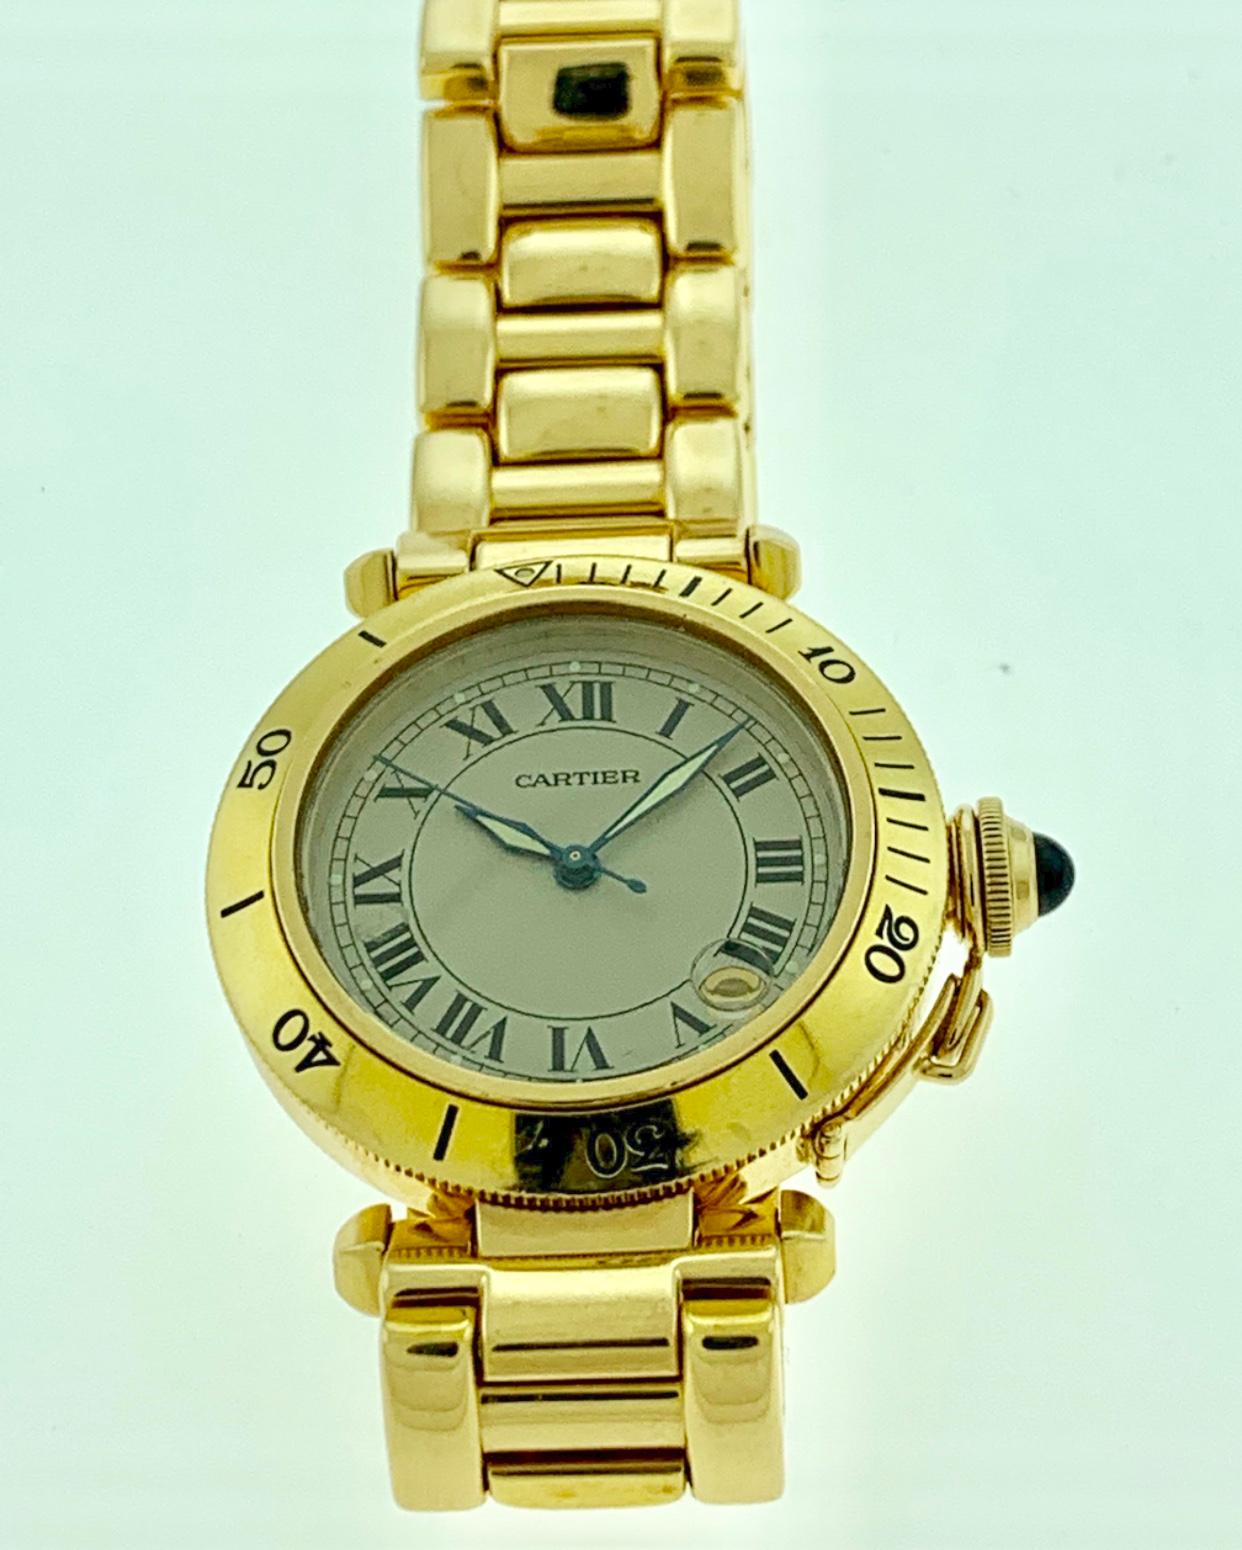 150 Gm 18 Karat Solid Yellow Gold Cartier Pasha Automatic Watch Water Resistant 2